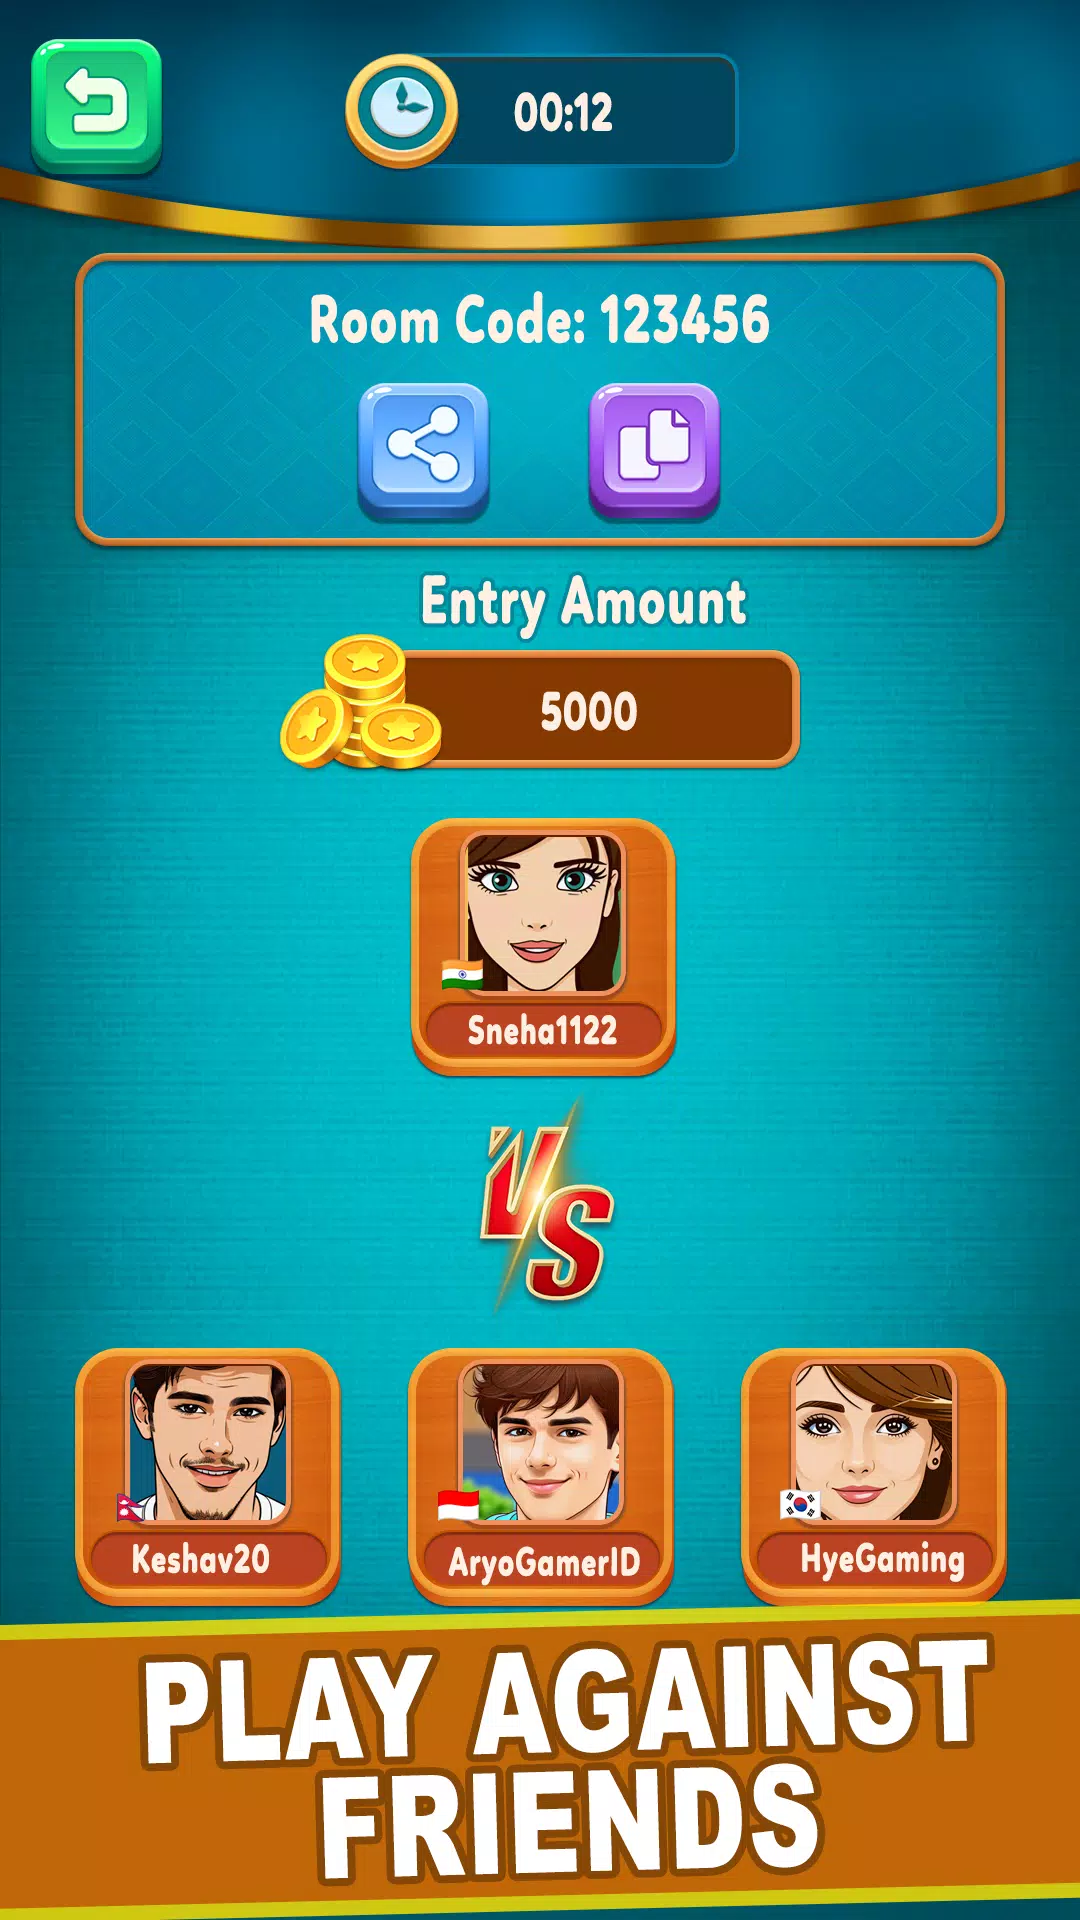 Play Ludo King Online with Friend Multiplayer Private Room codes